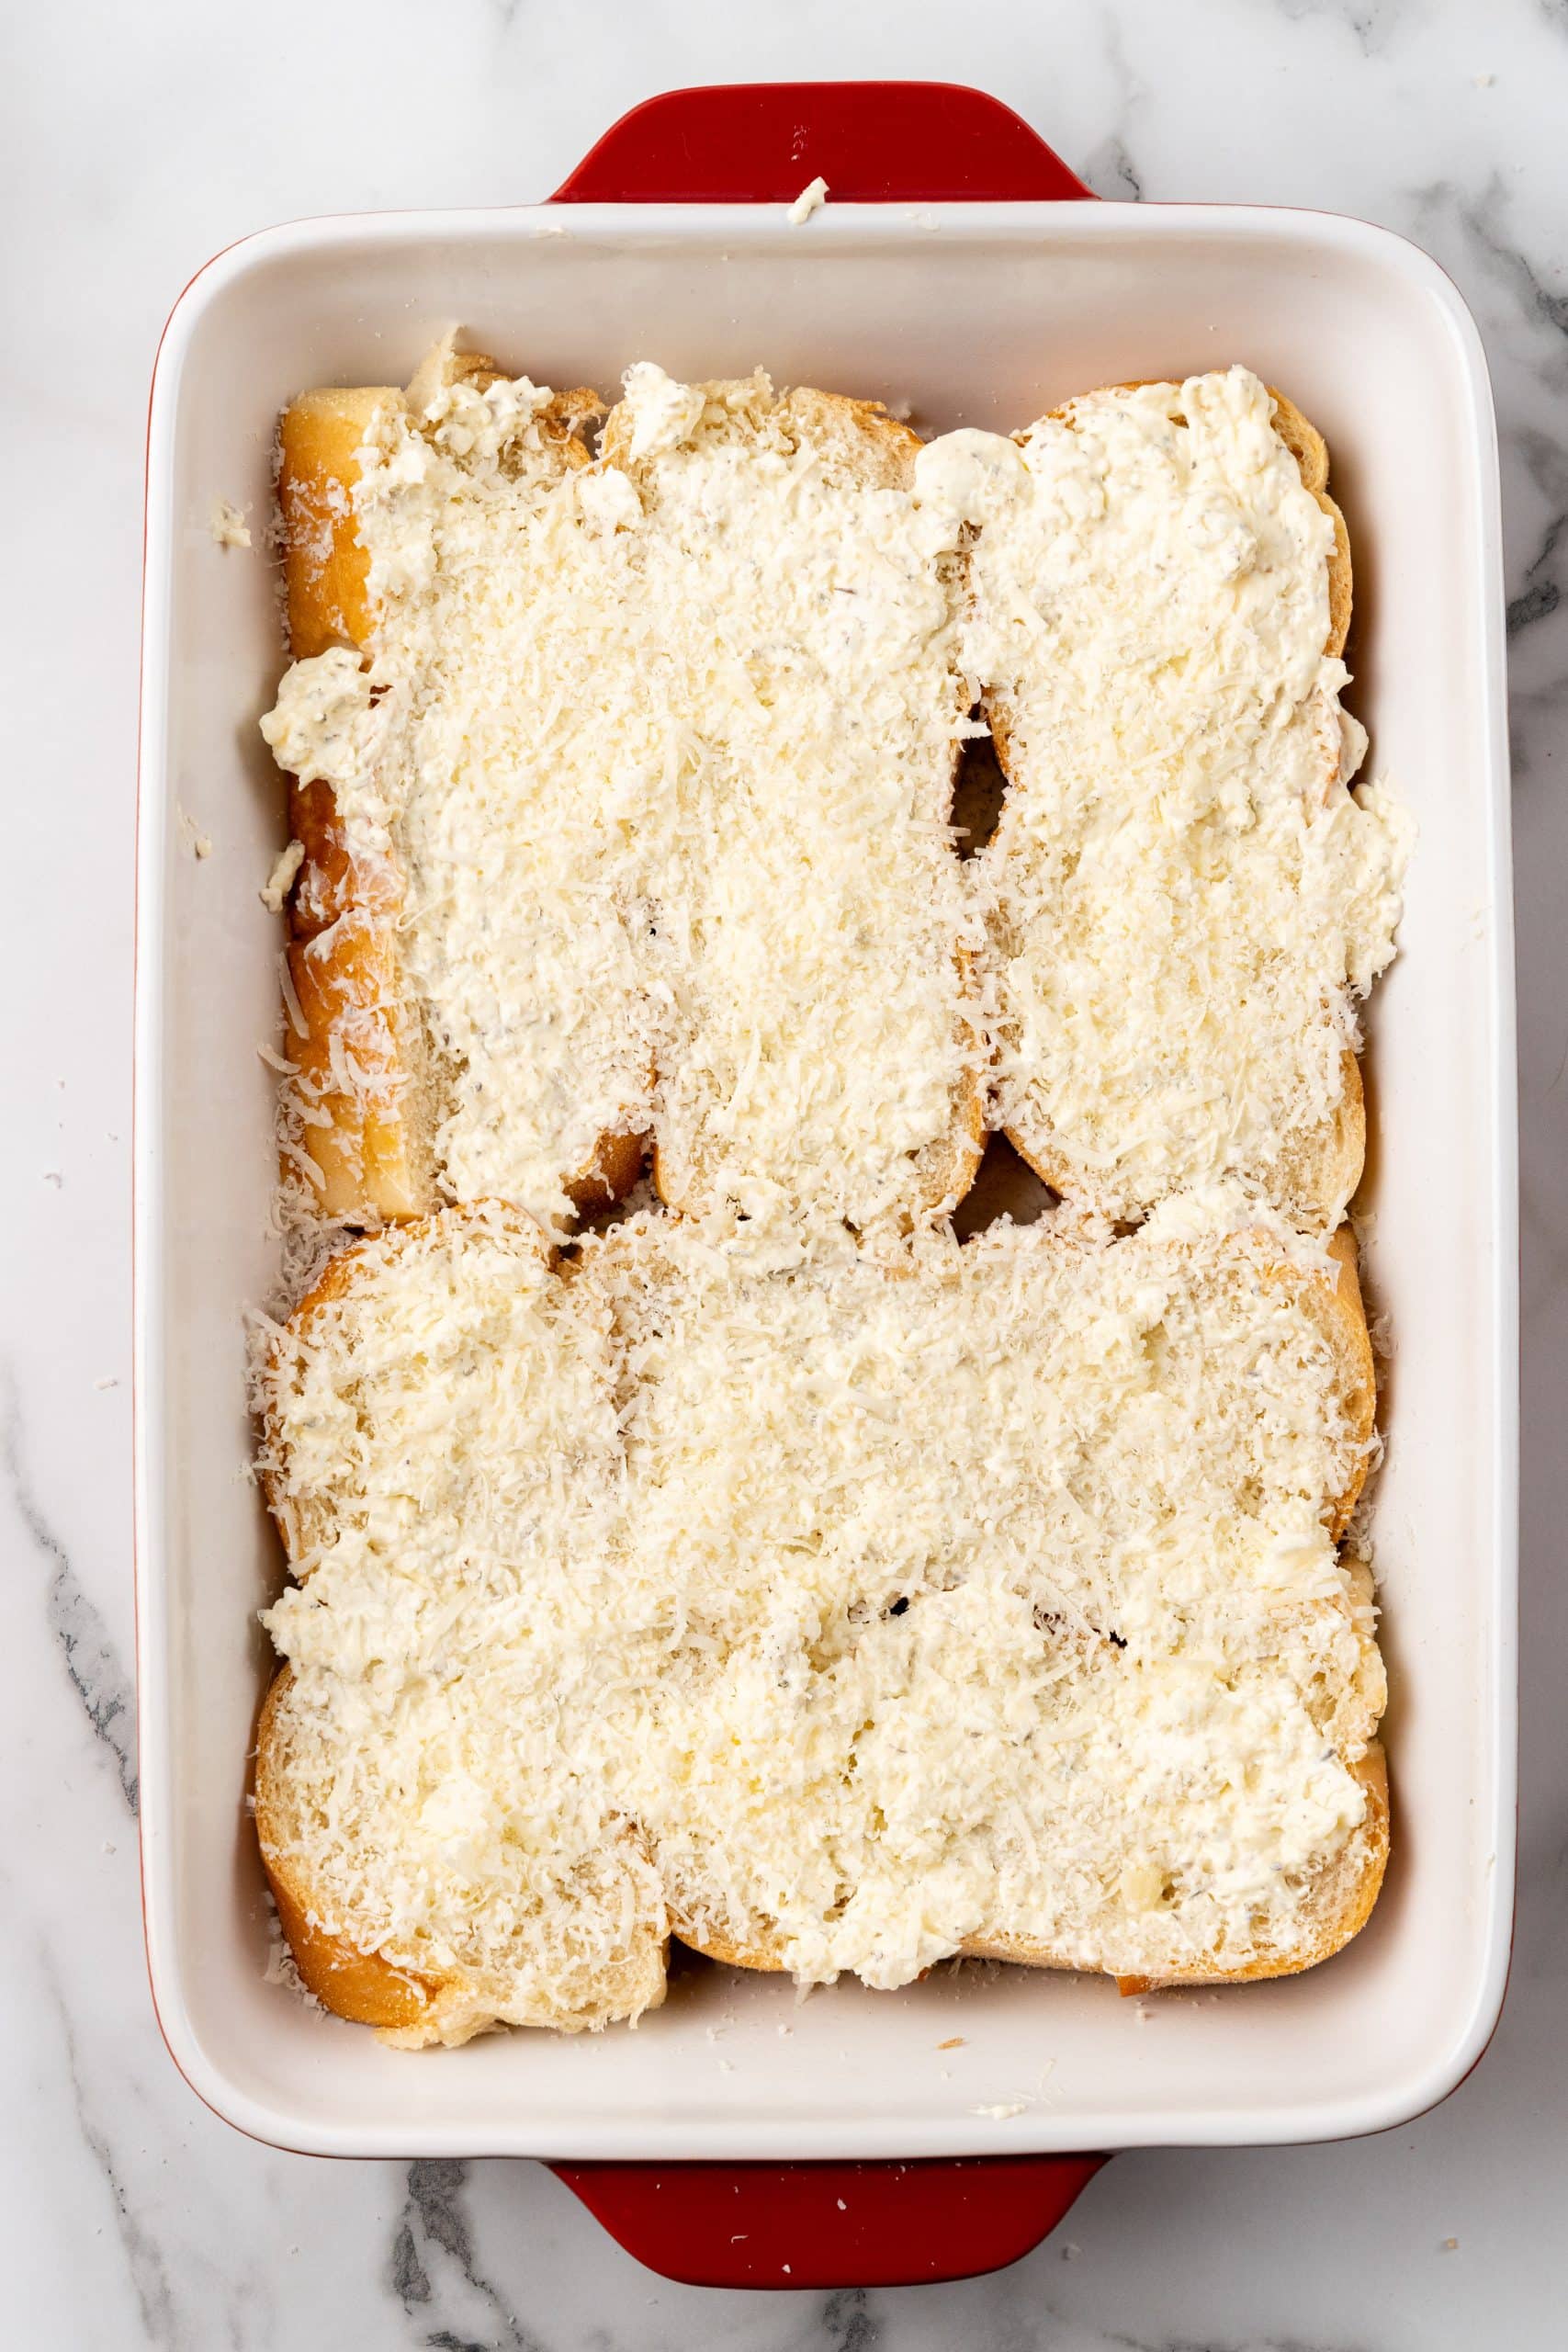 Parmesan cheese spread over cream cheese covered slices of bread in a large baking dish